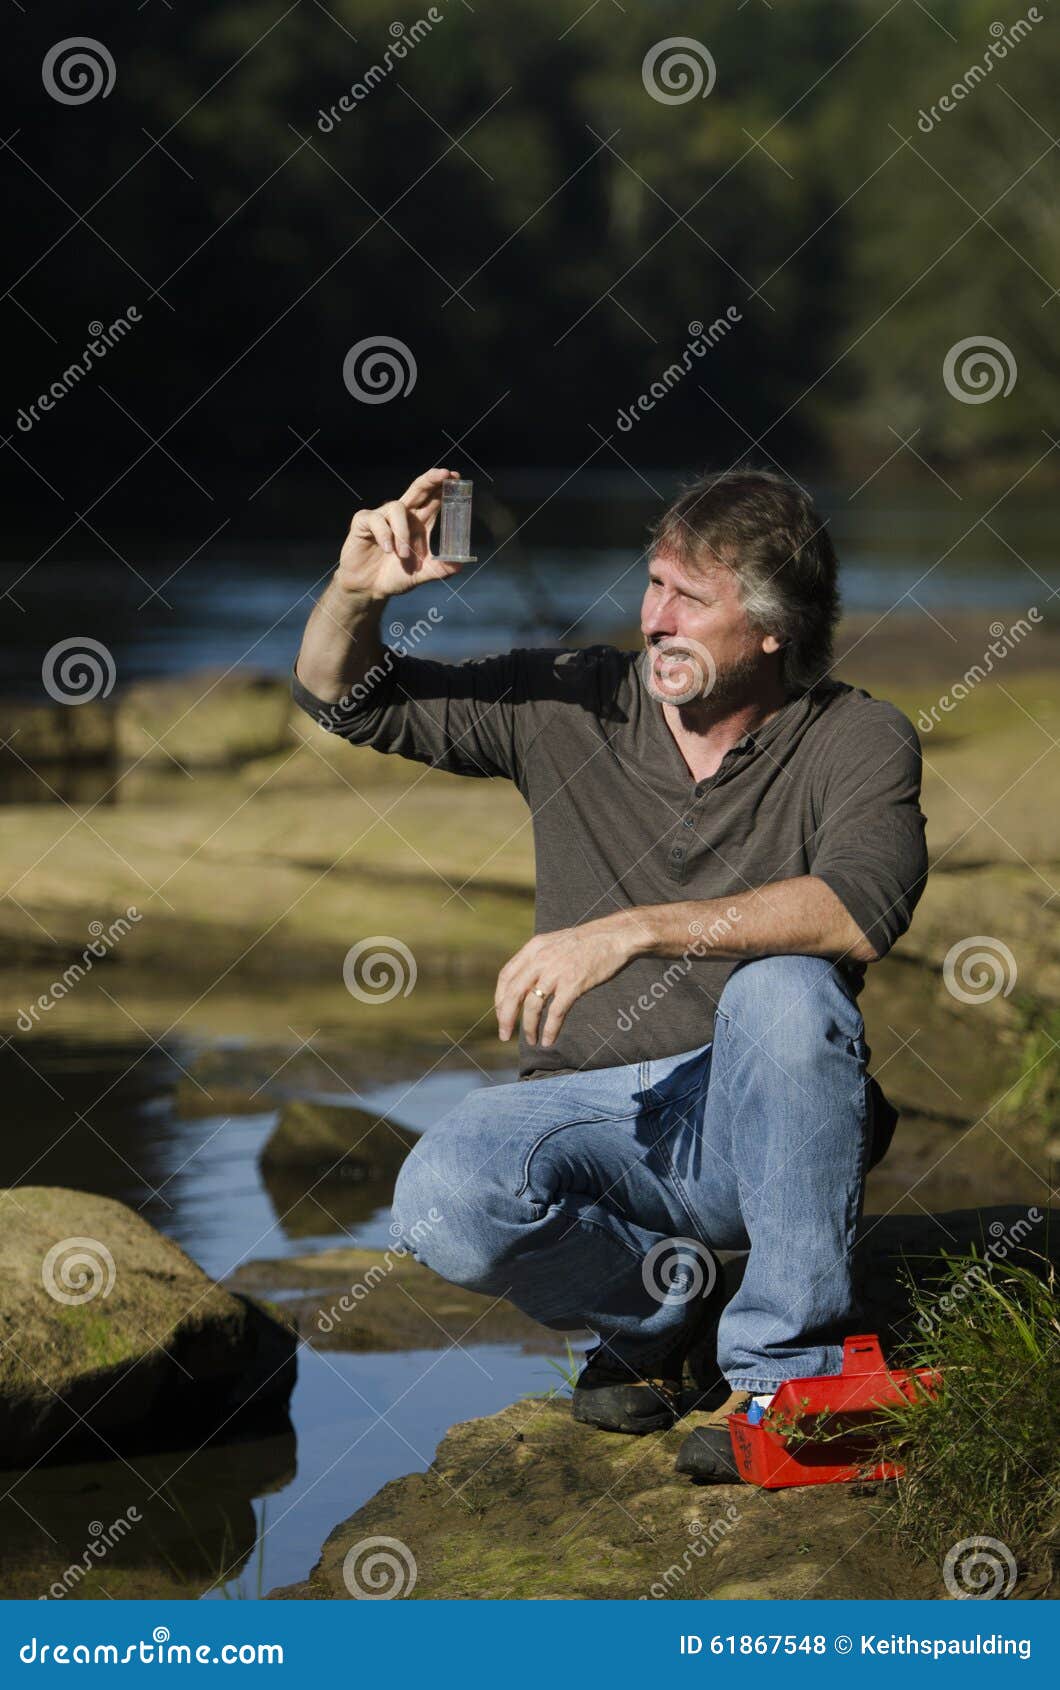 Checking water quality stock photo. Image of rocks, ecology - 61867548